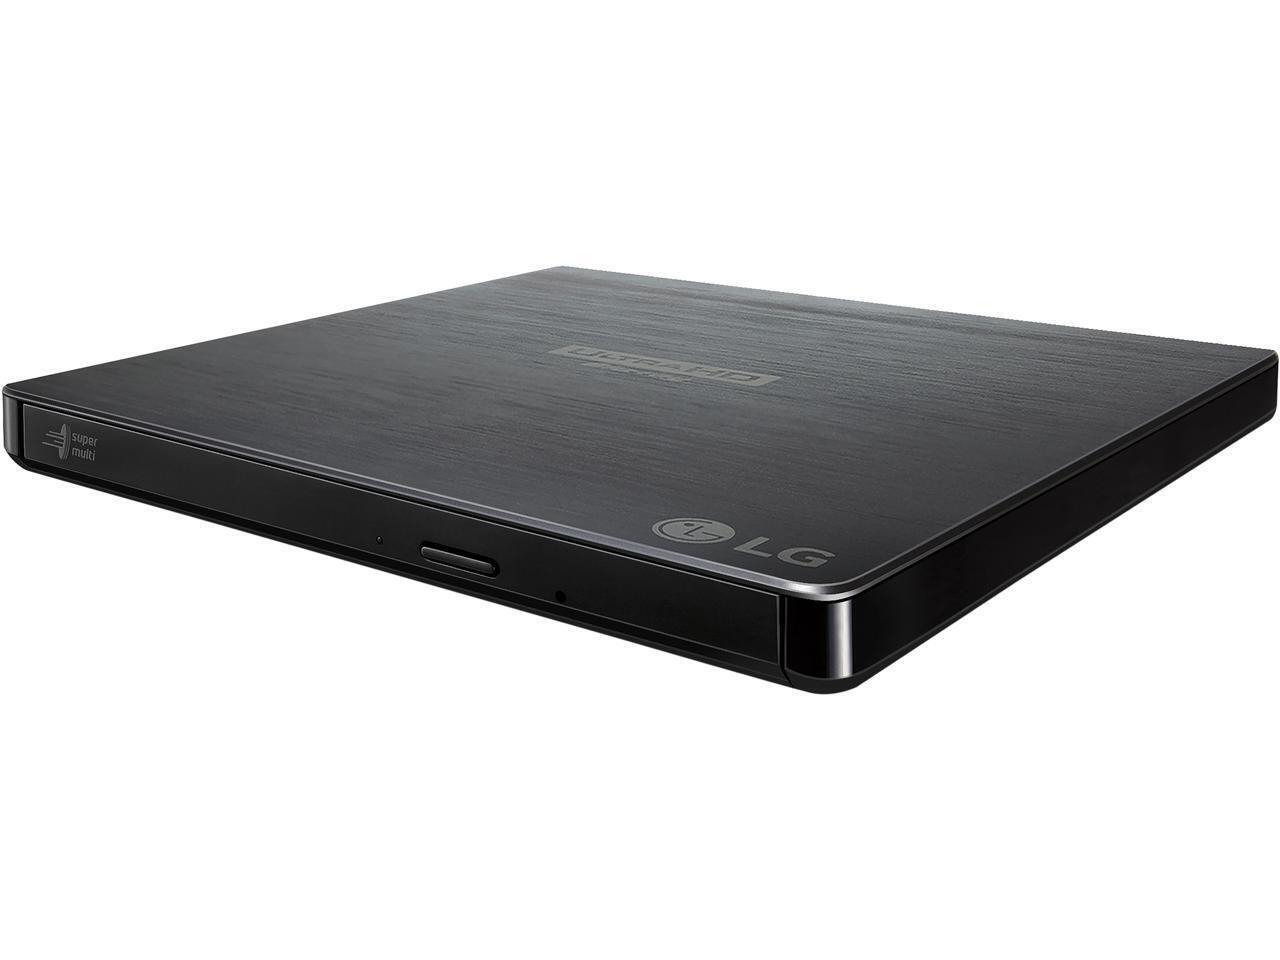 LG Ultra Slim Portable Blu-ray / DVD Writer - UHD ready and M-DISCTM Support